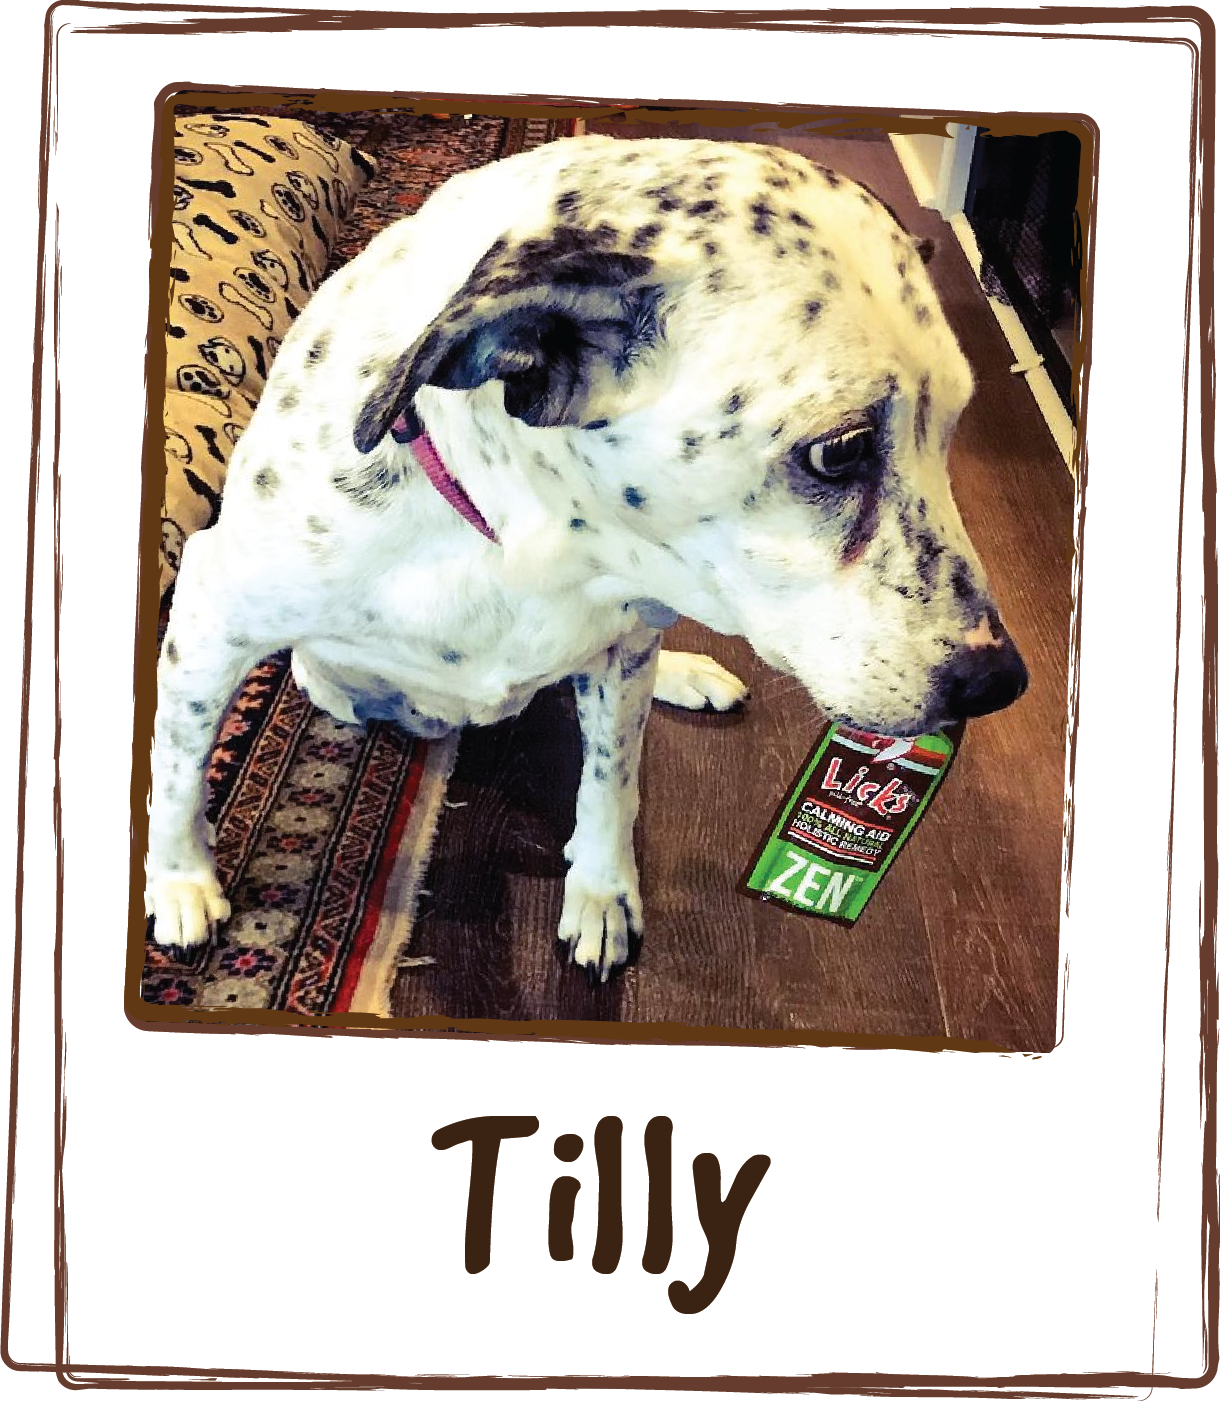  “Tilly is happy, loves to sun bathe and play with the kids. All thanks to LICKS. And she loves it so much that she tries to eat the package!” 